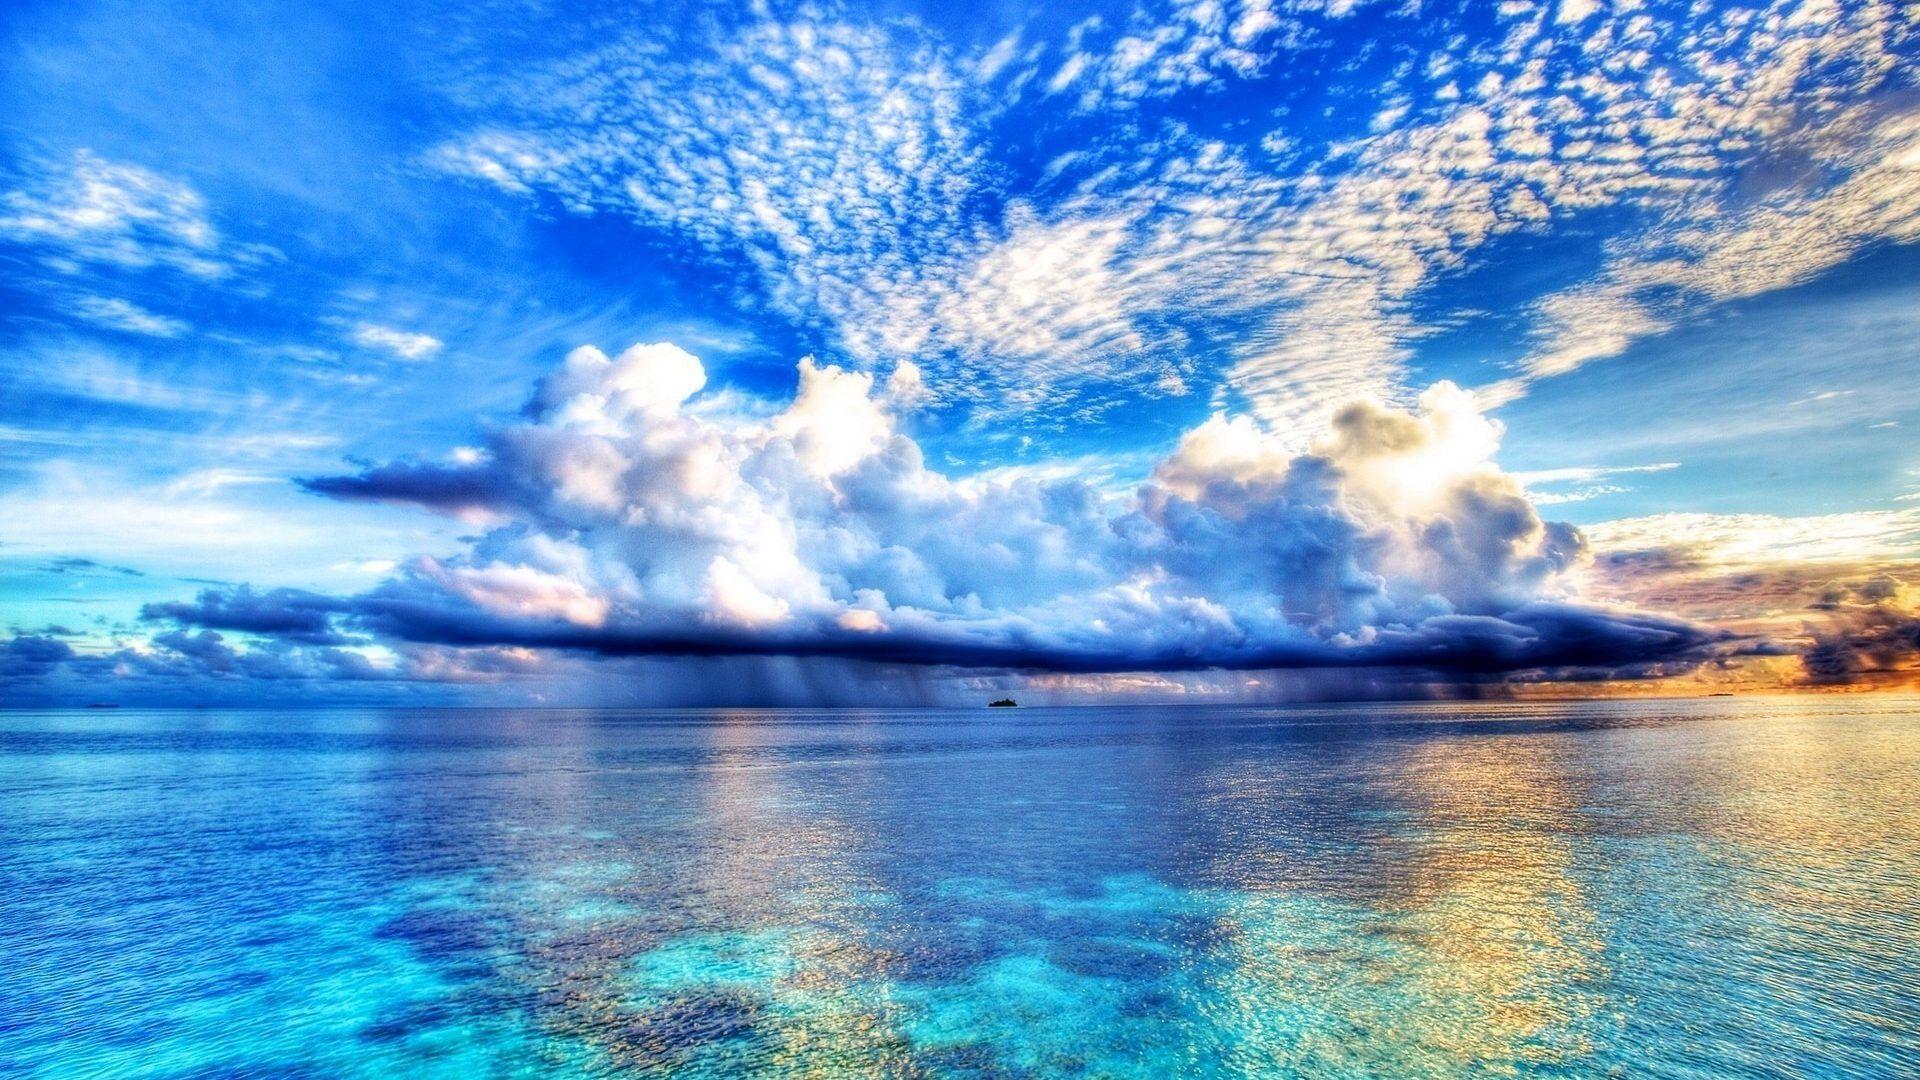 Sky: Natural Blue Landscapes Skies Scenery Sea Clouds Nature HD